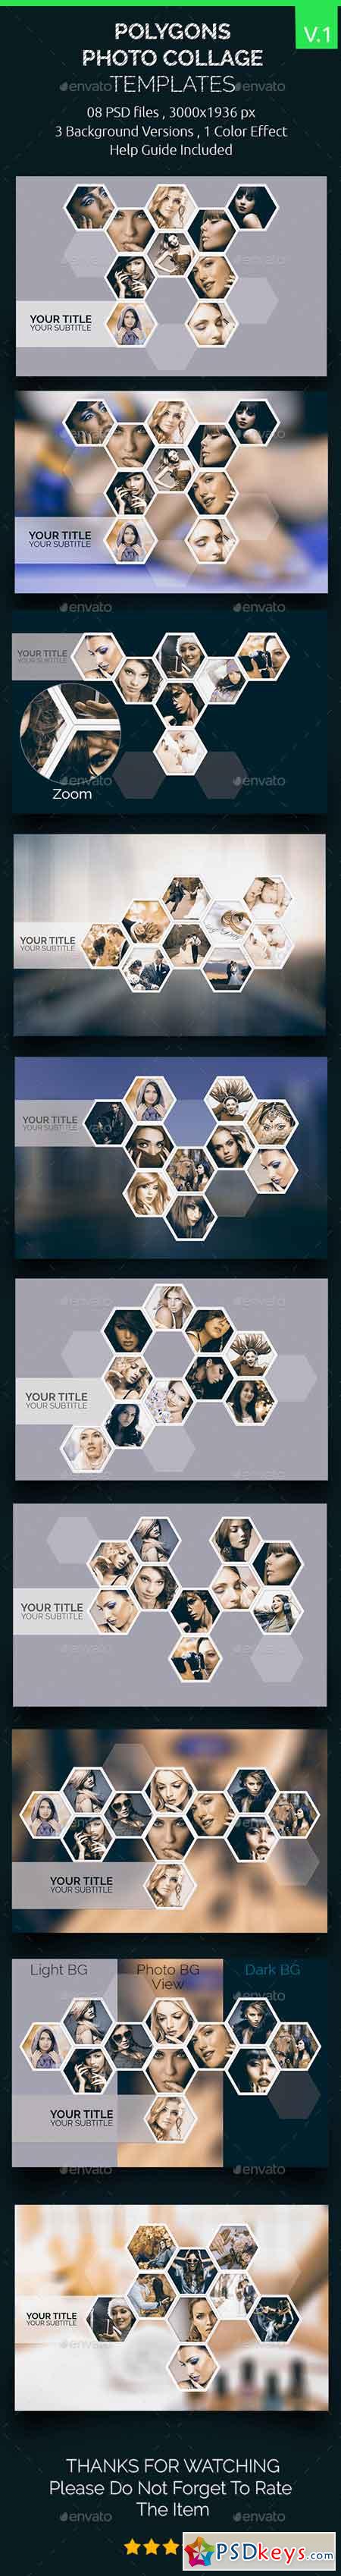 Polygons Photo Collage Templates 17072964